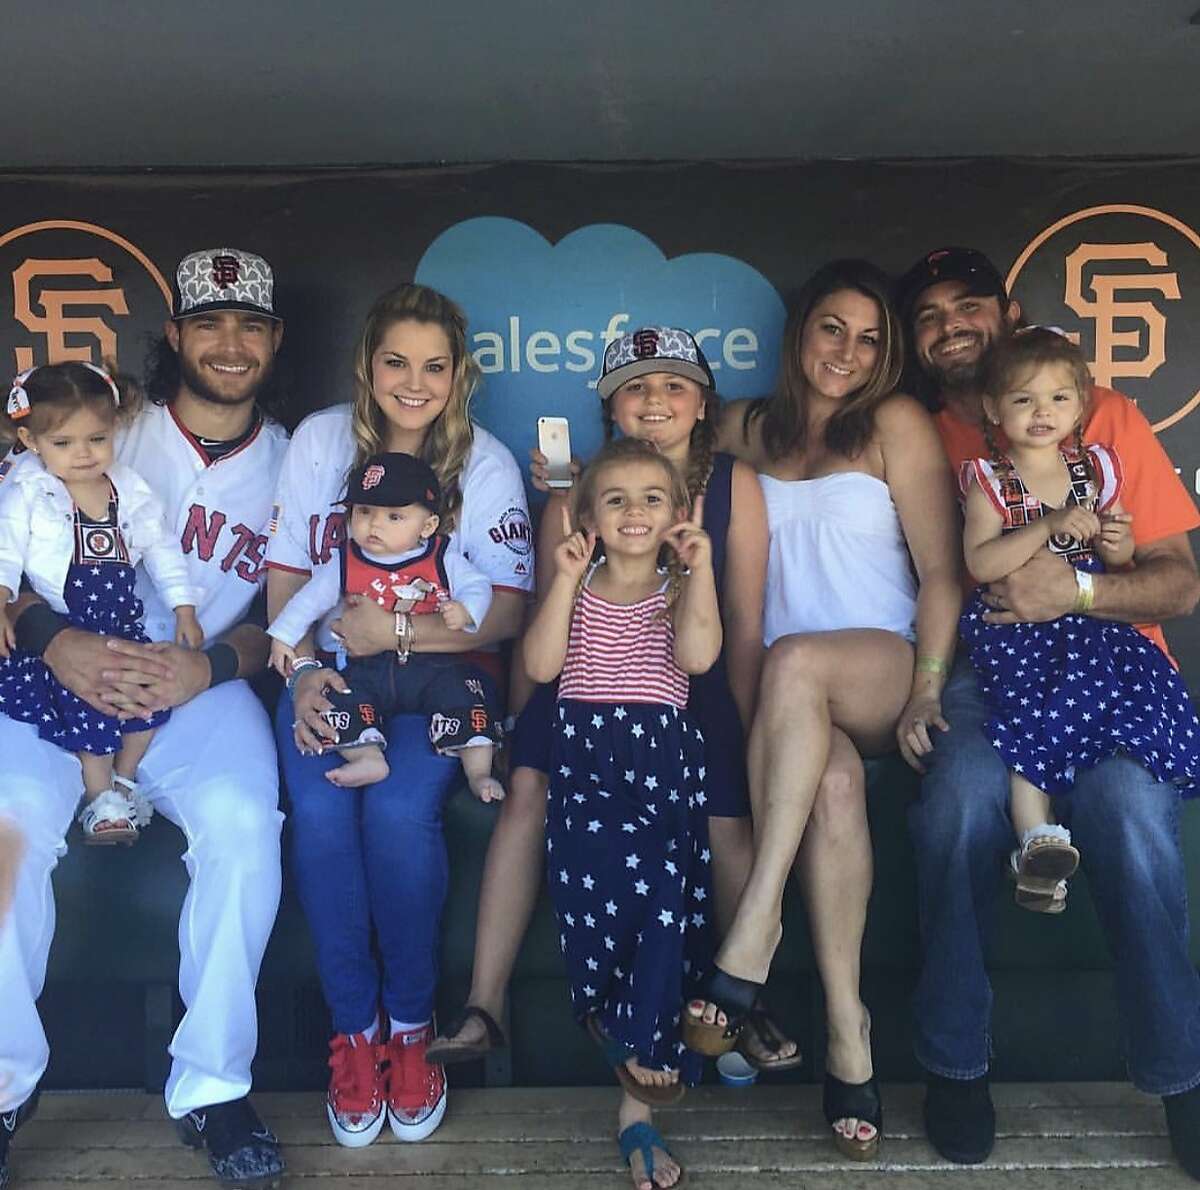 Brandon Crawford plays on amid family grief